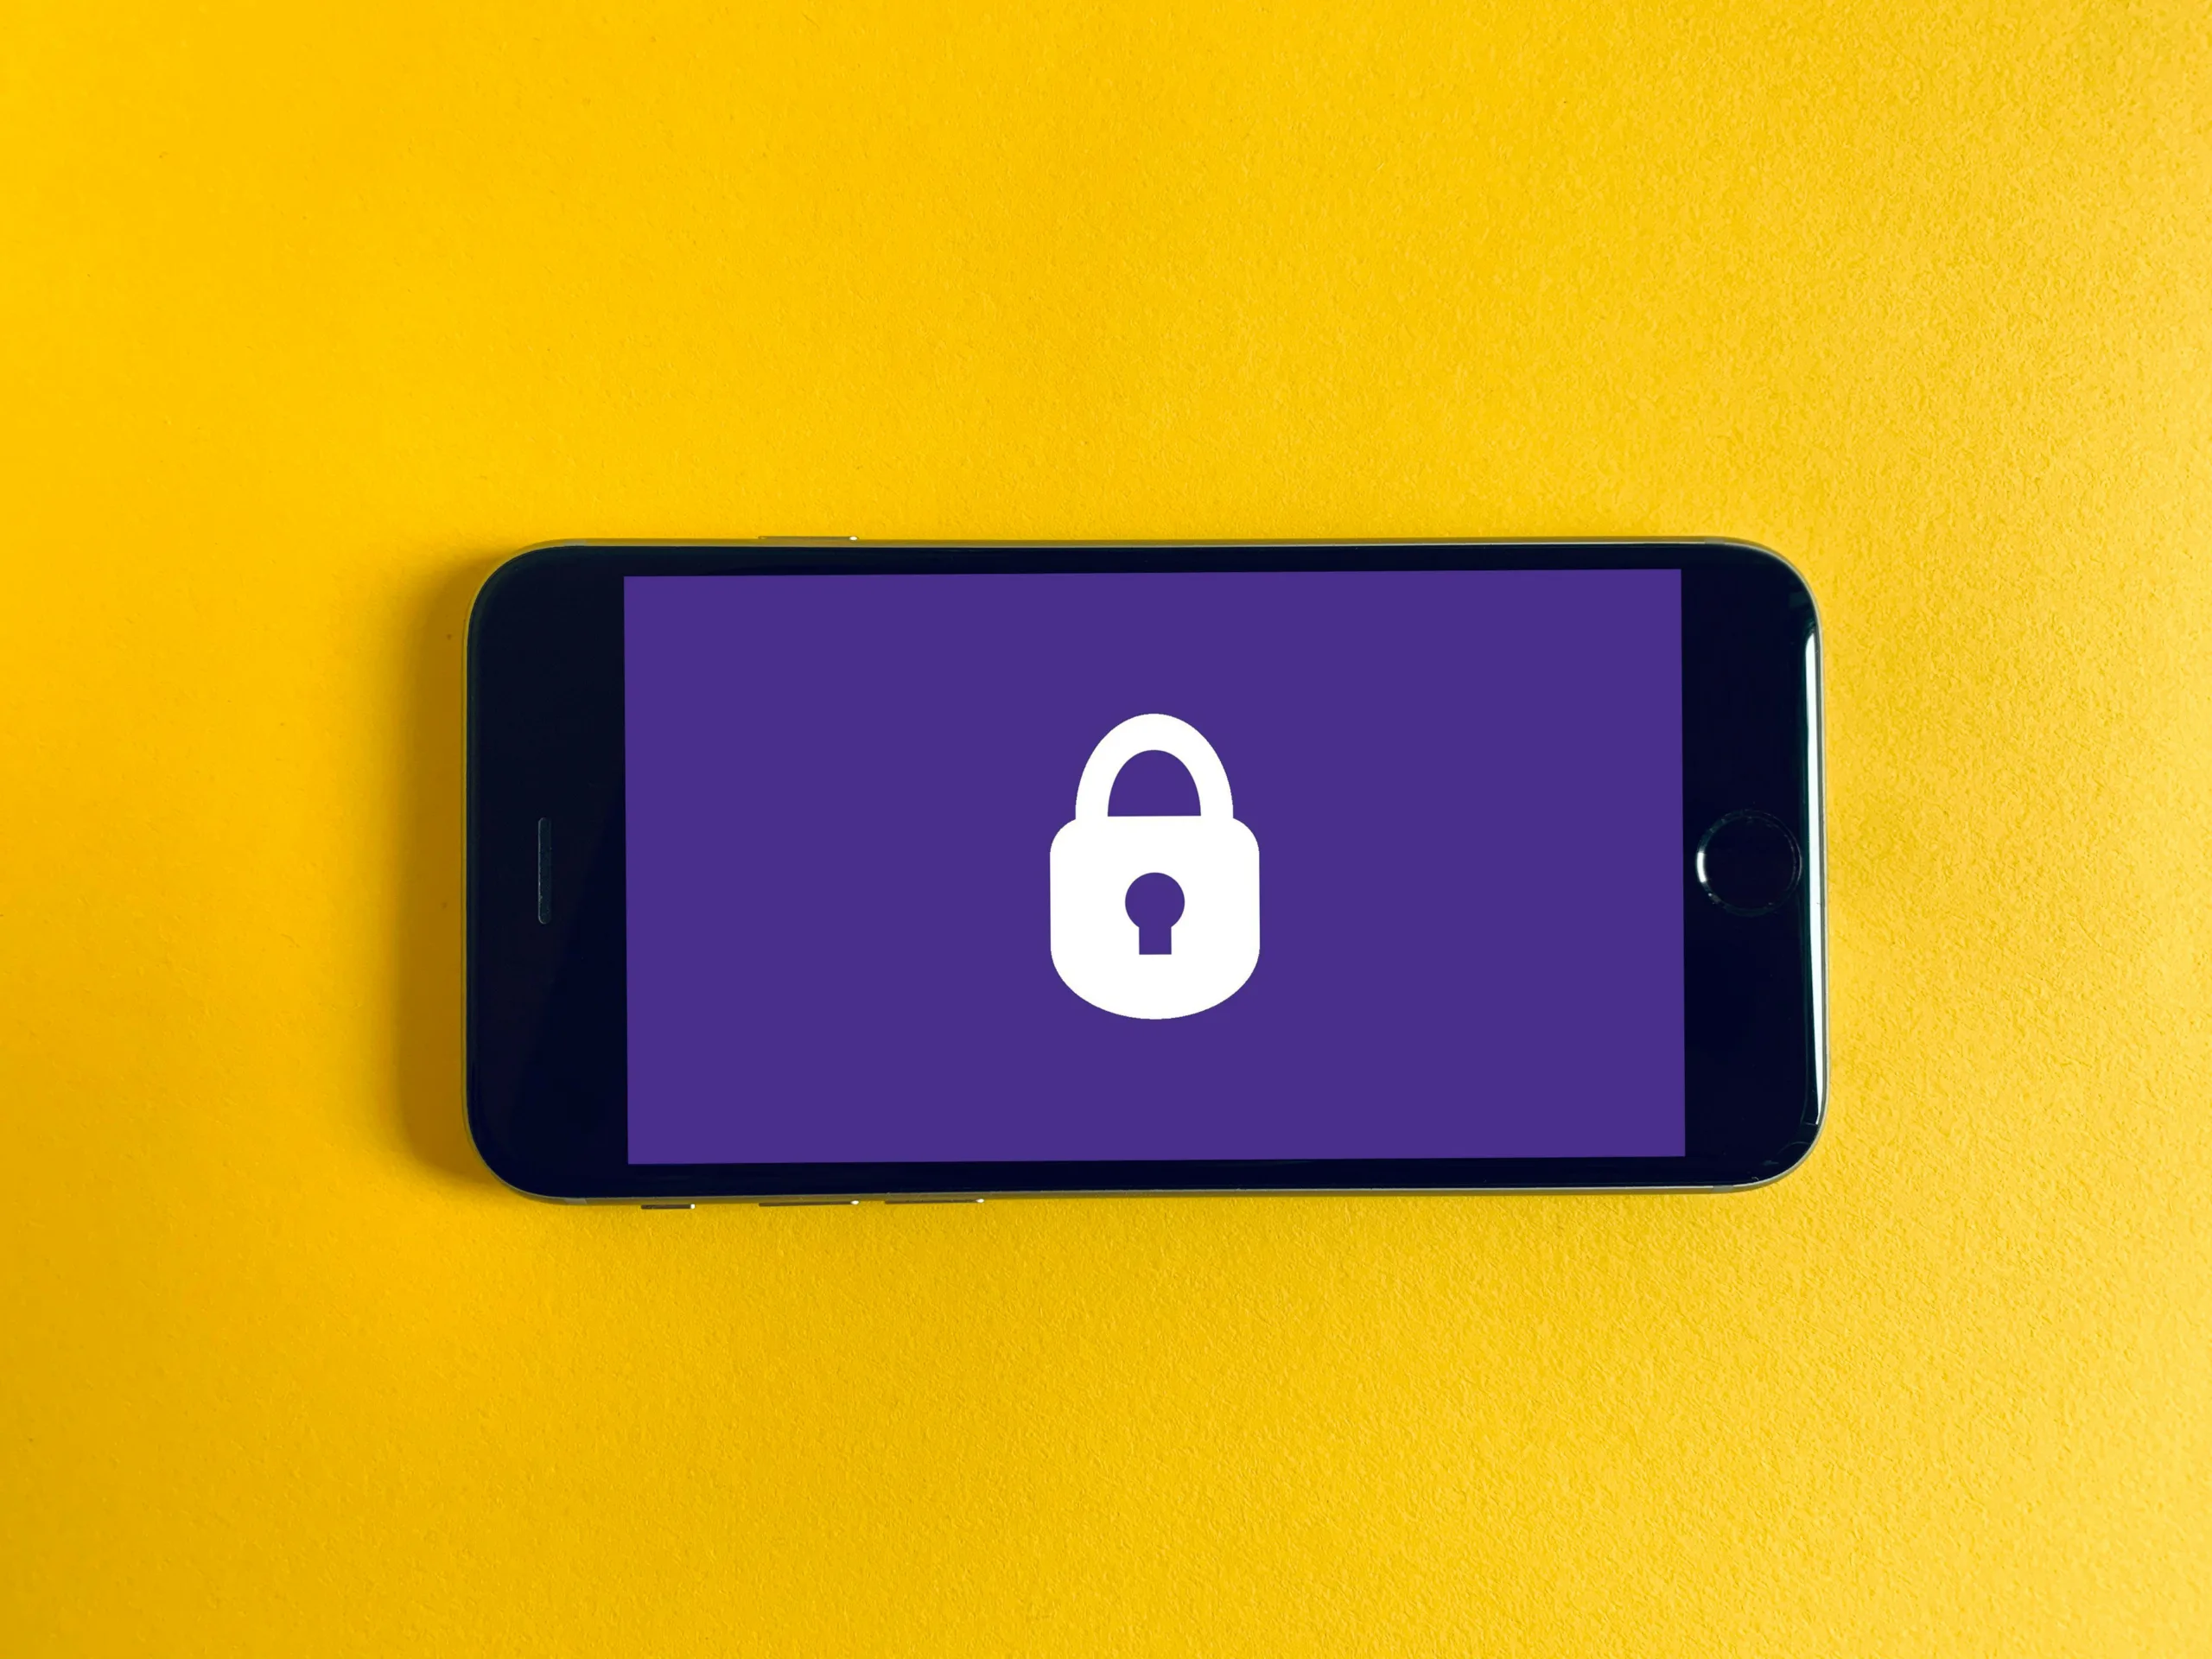 Smartphone with a screen displaying a white padlock icon on a purple background, placed on a bright yellow surface